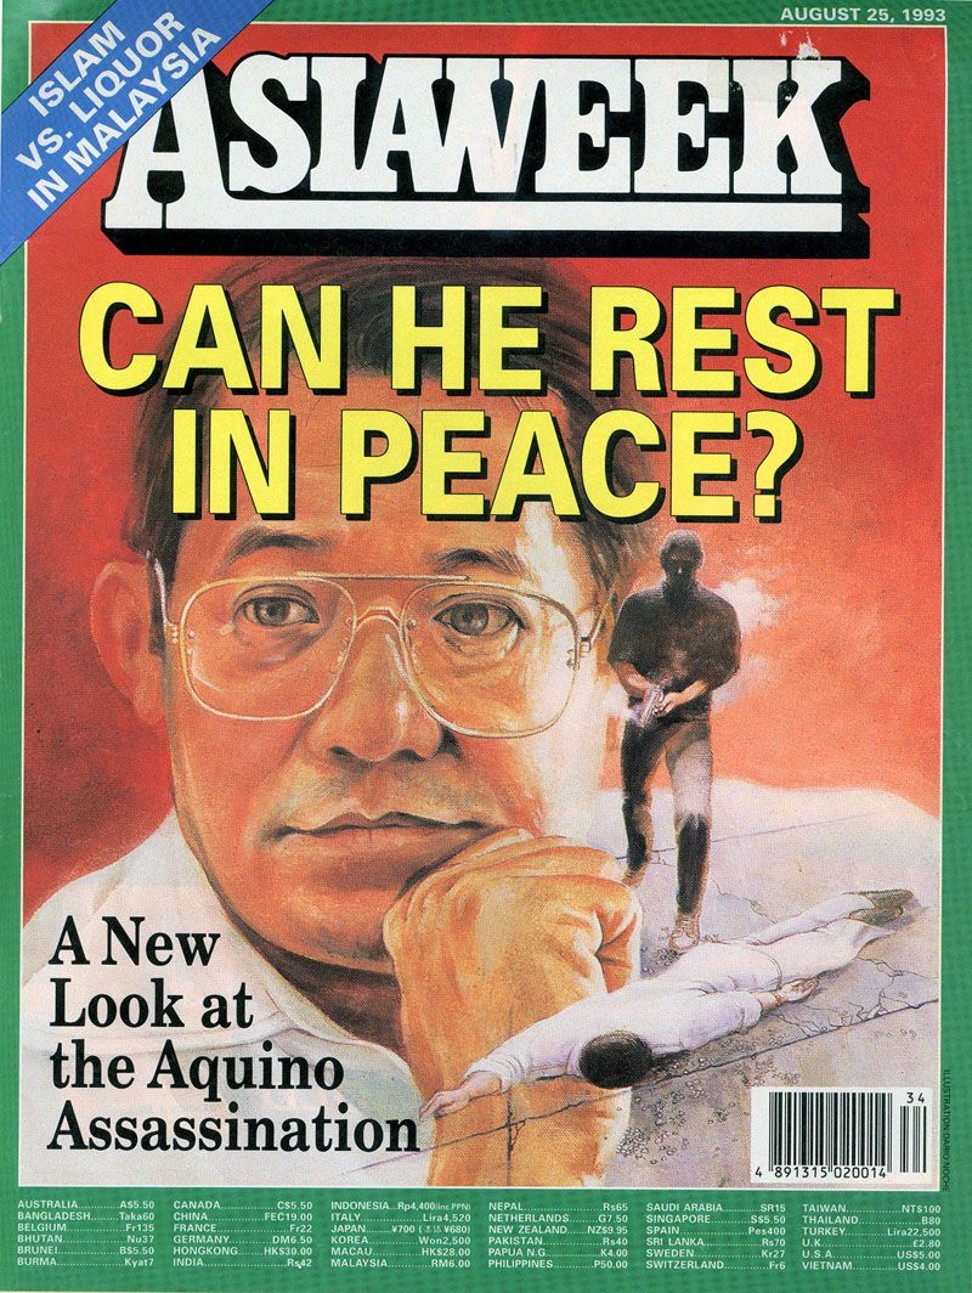 Cover of an issue of Asiaweek from 1993.